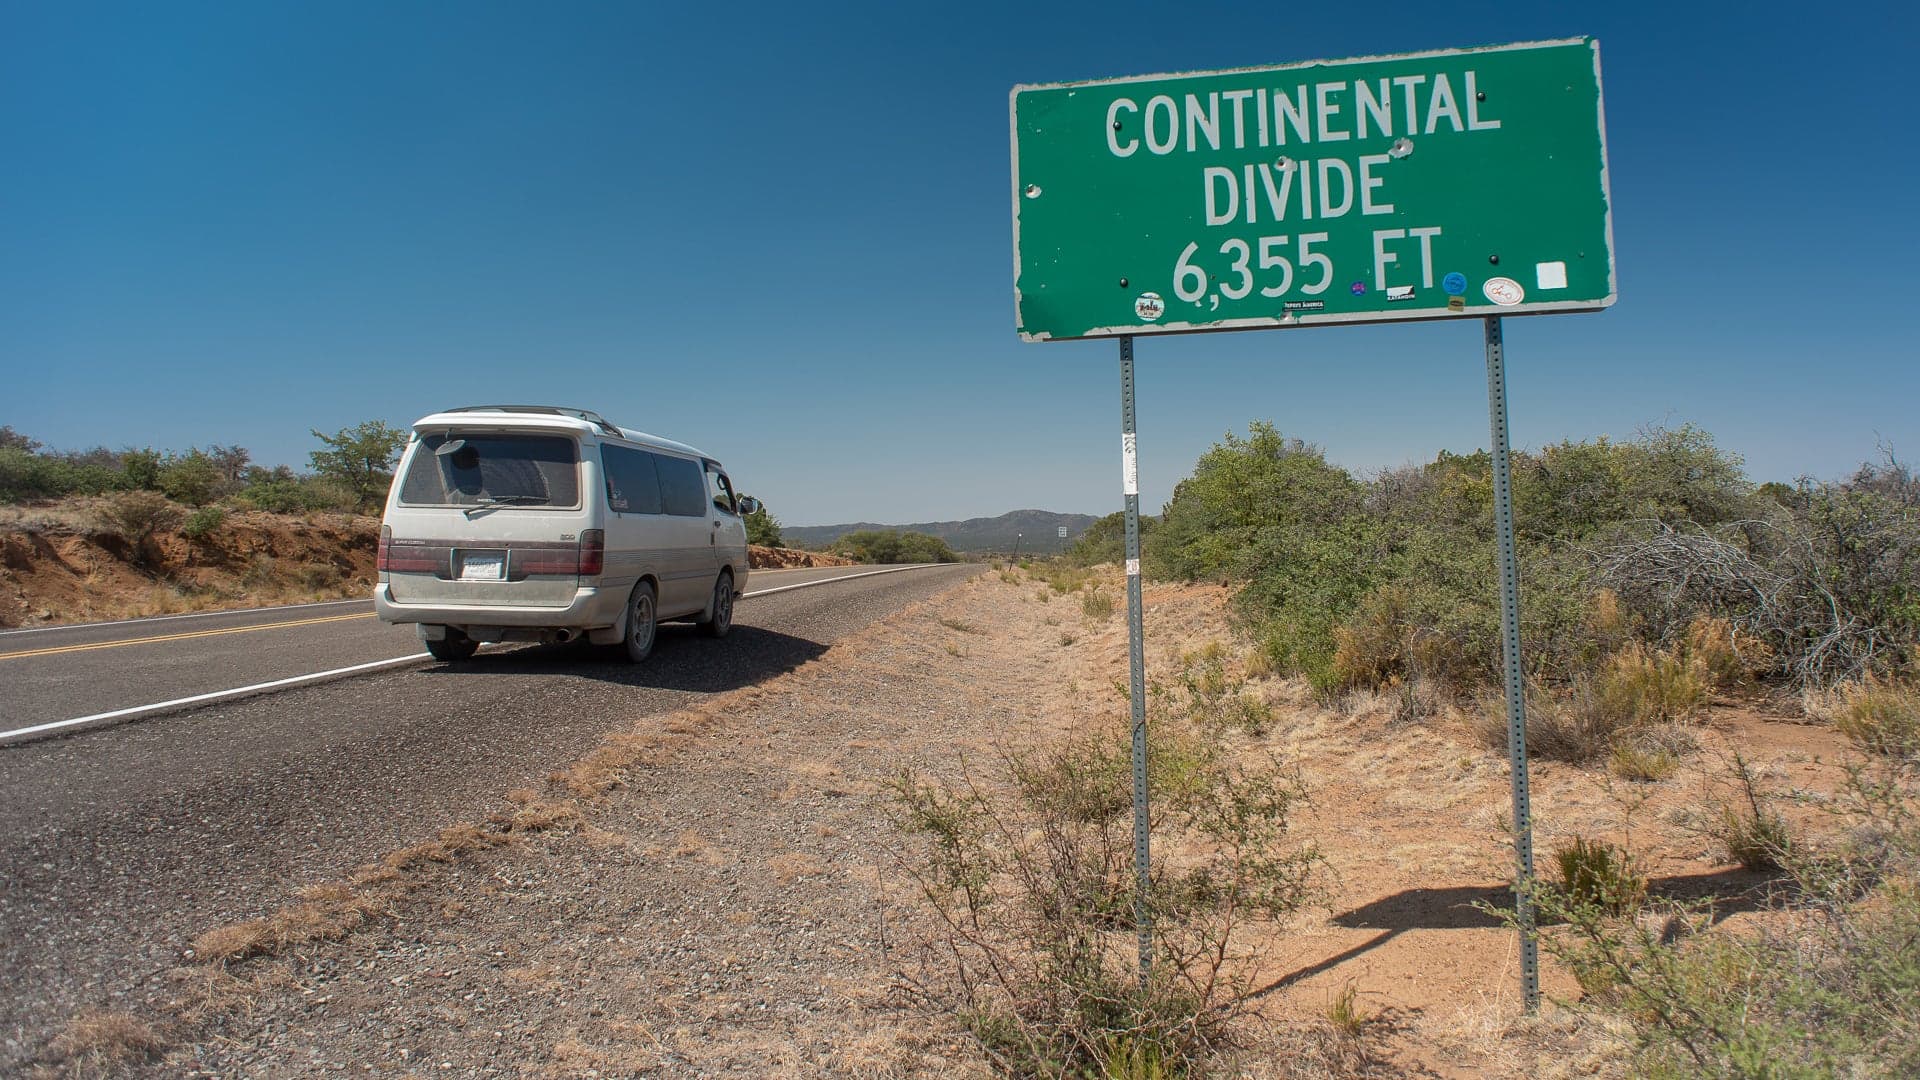 Dead Vibes and a Dead Alternator: My JDM Toyota Van Meets Some Fear and Loathing in the Desert